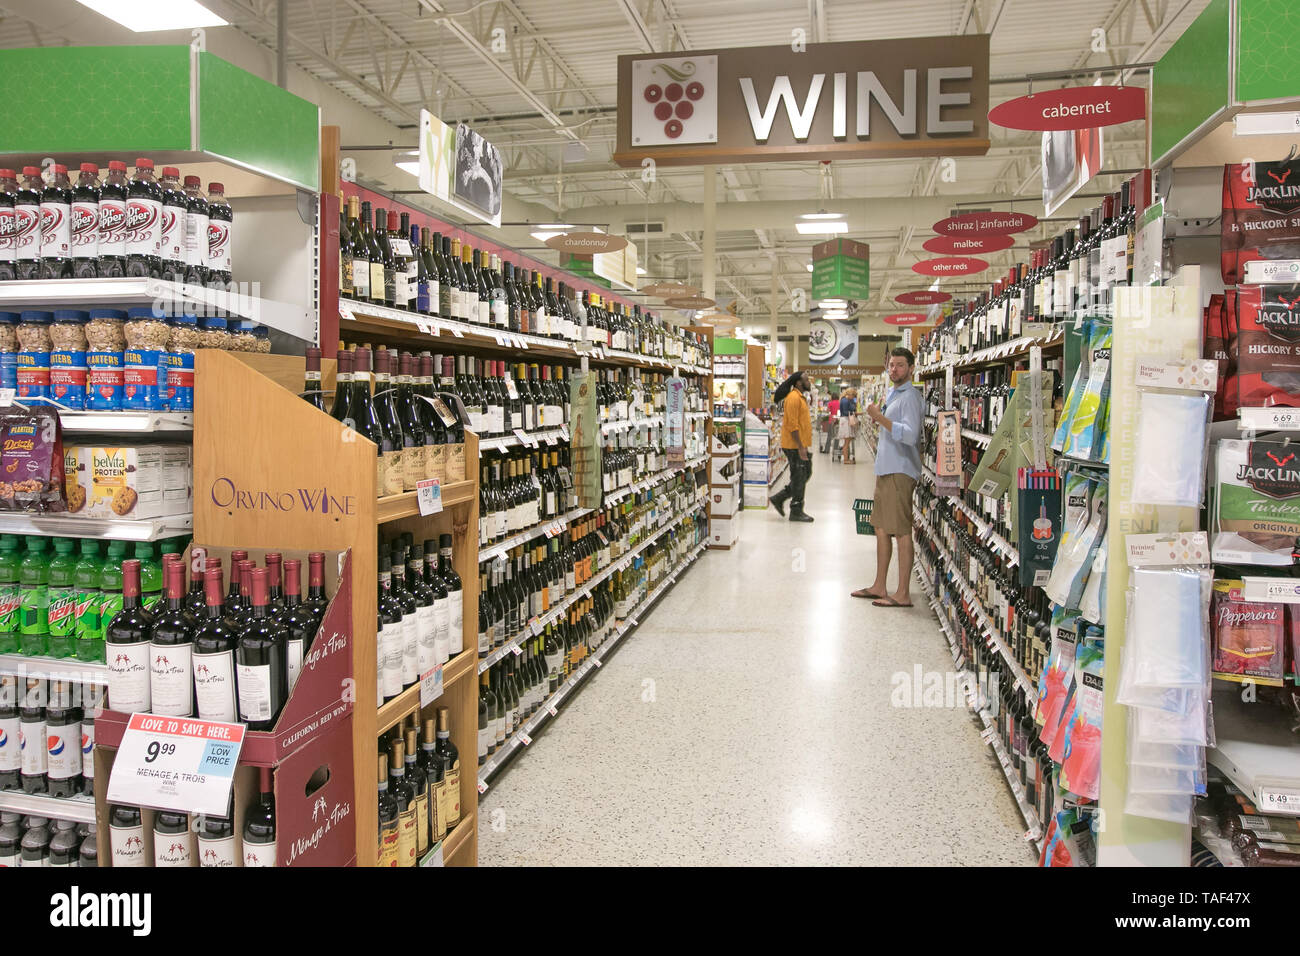 Fort Lauderdale, FL, 5/15/2019: People are shopping at the wine section of a Publix supermarket. Stock Photo